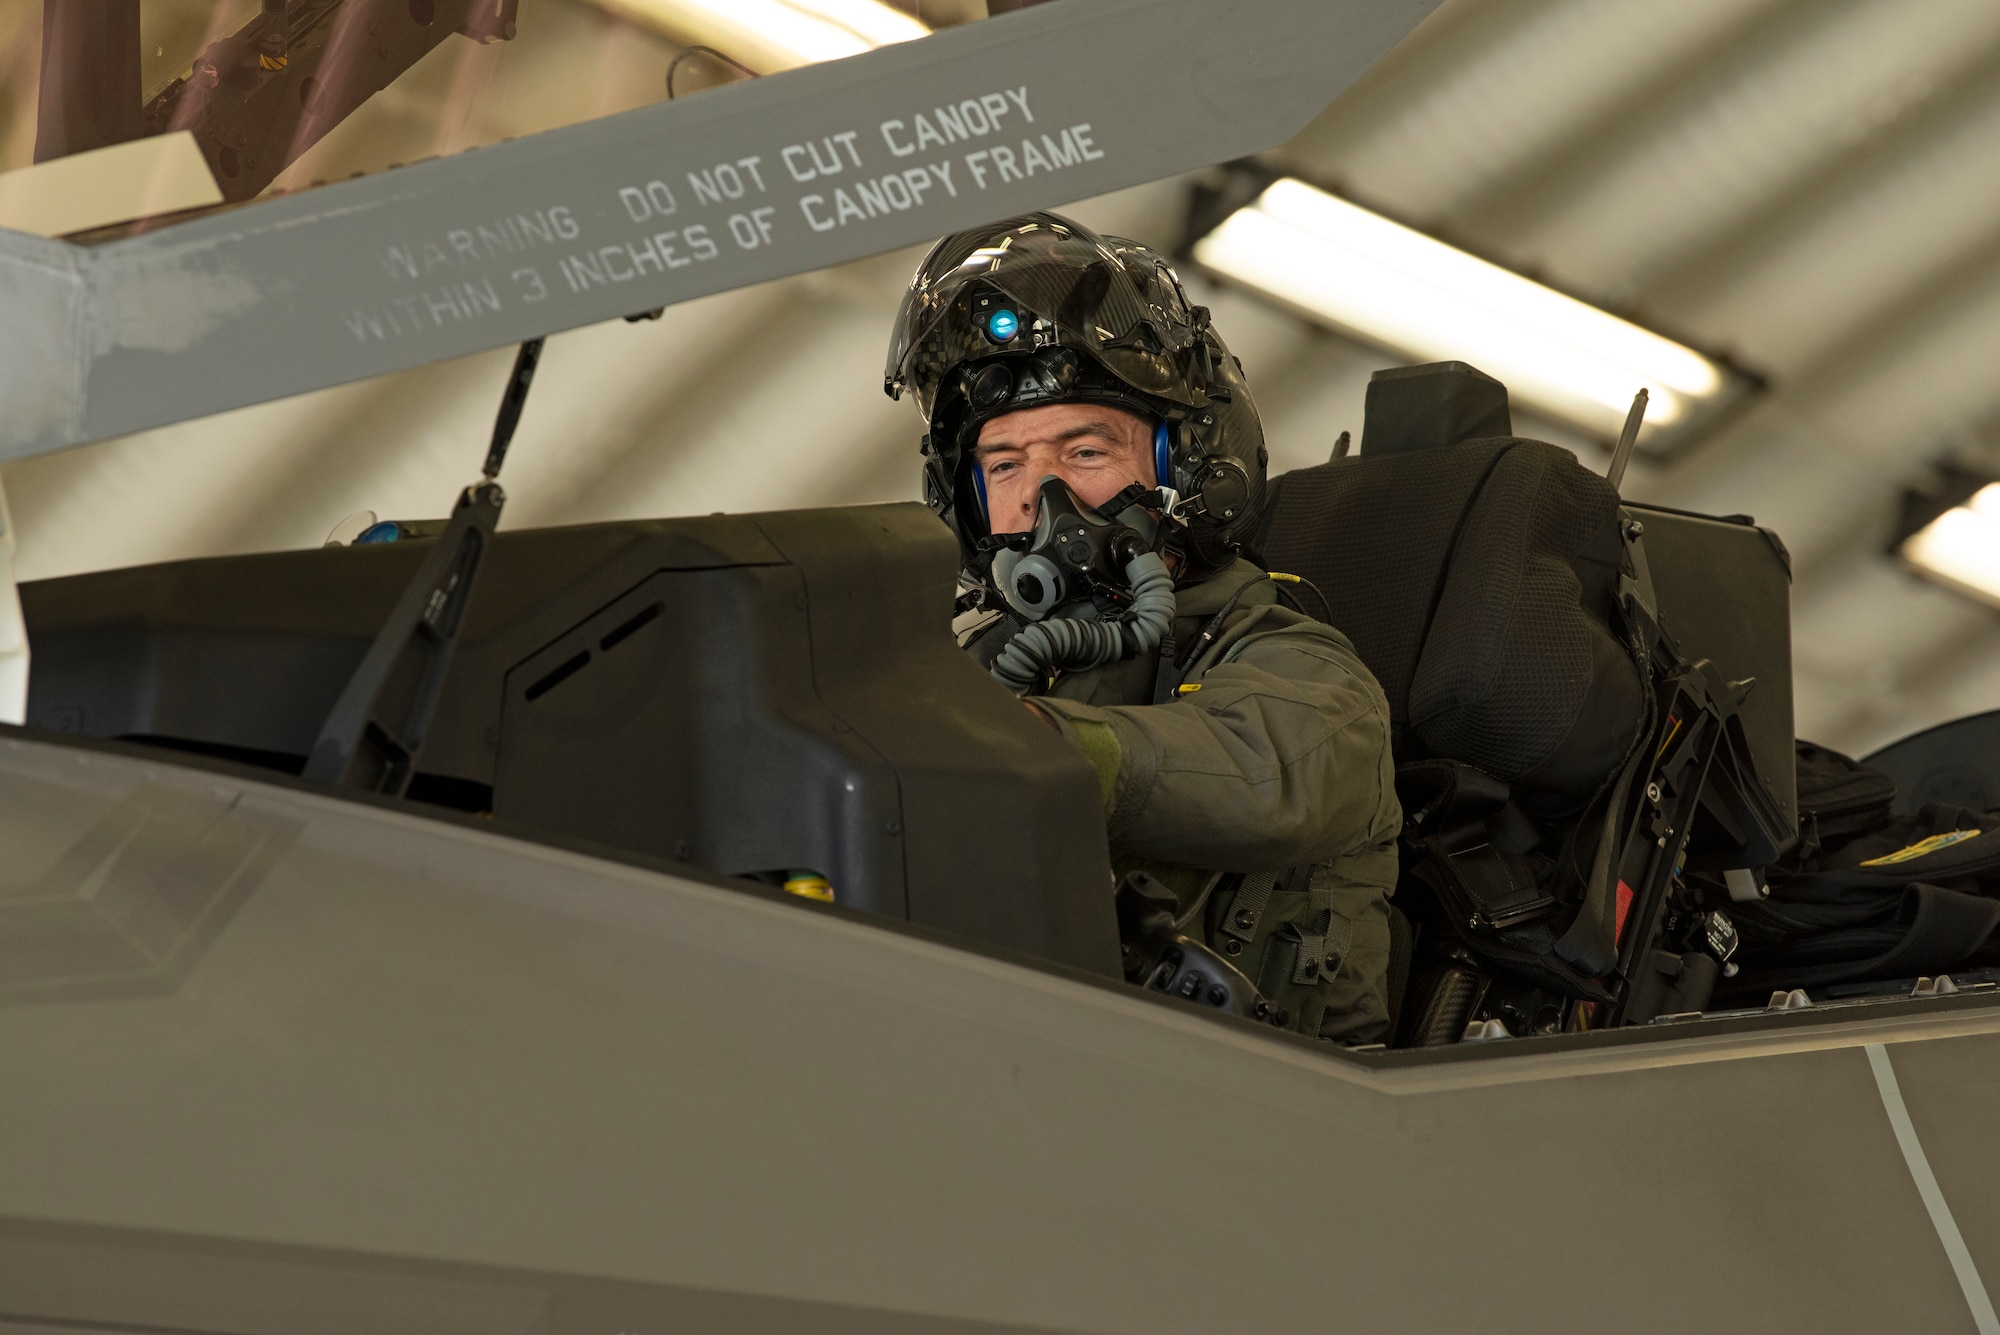 U.S. Air Force Lt. Col. Christopher White, 315th Fighter Squadron commander, deployed to Spangdahlem Air Base, Germany, prepares an F-35A Lightning II aircraft for takeoff, June 3, 2022. Members of the 158th Fighter Wing are in Europe to support NATO’s ongoing air policing mission to deter aggression and assure allies and partners in the region.